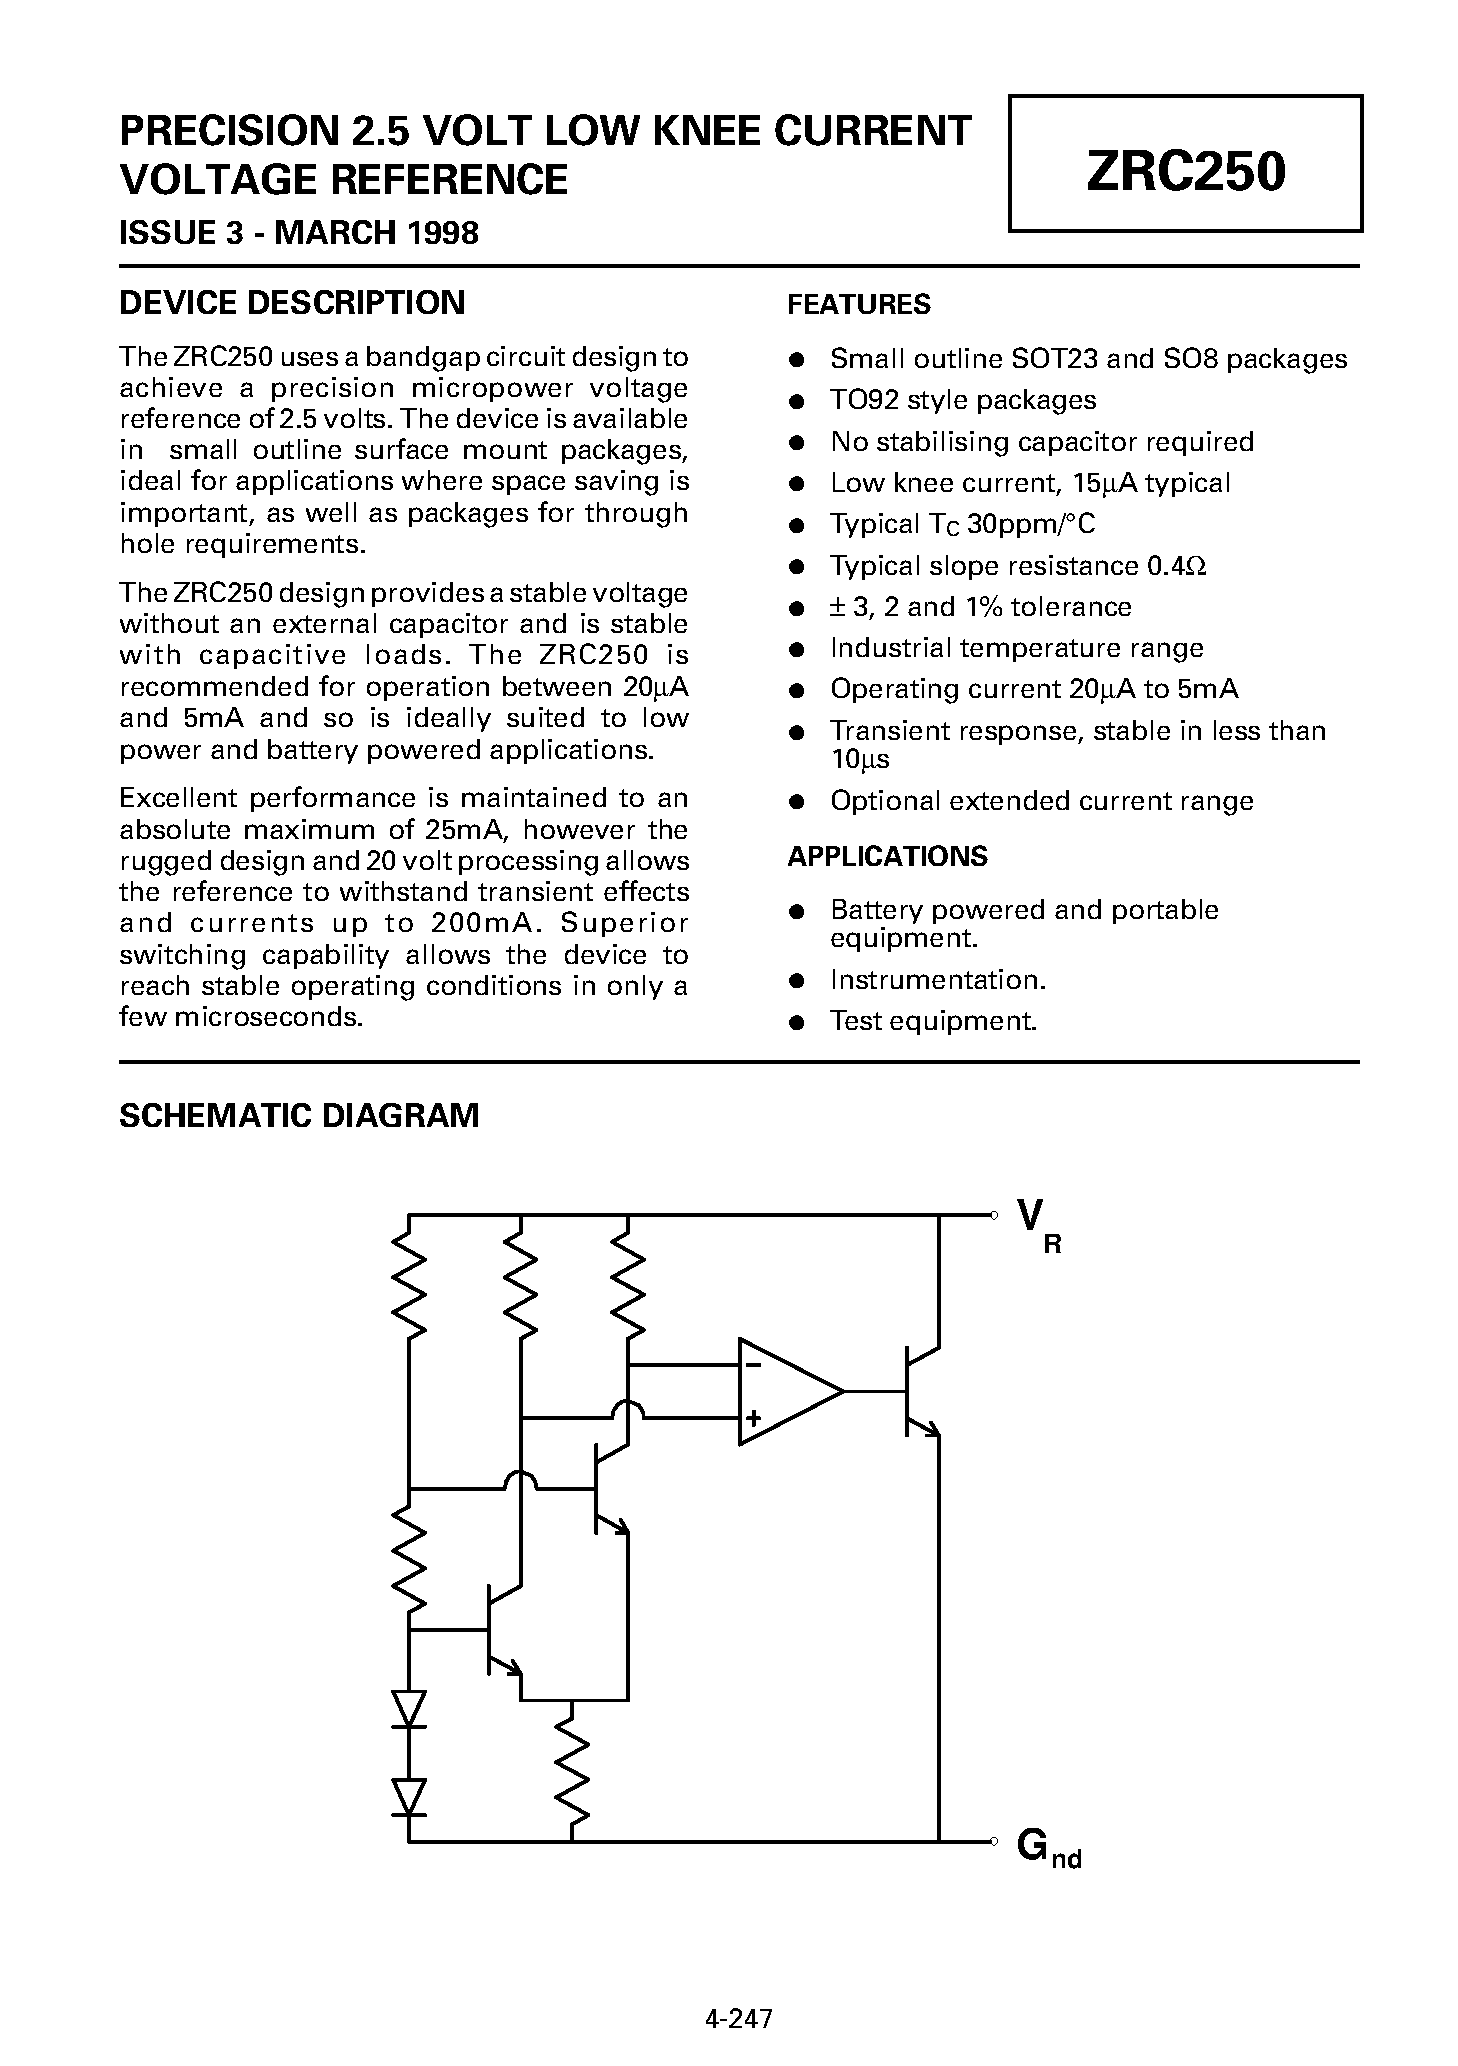 Datasheet ZRC250F03 - PRECISION 2.5 VOLT LOW KNEE CURRENT VOLTAGE REFERENCE page 1